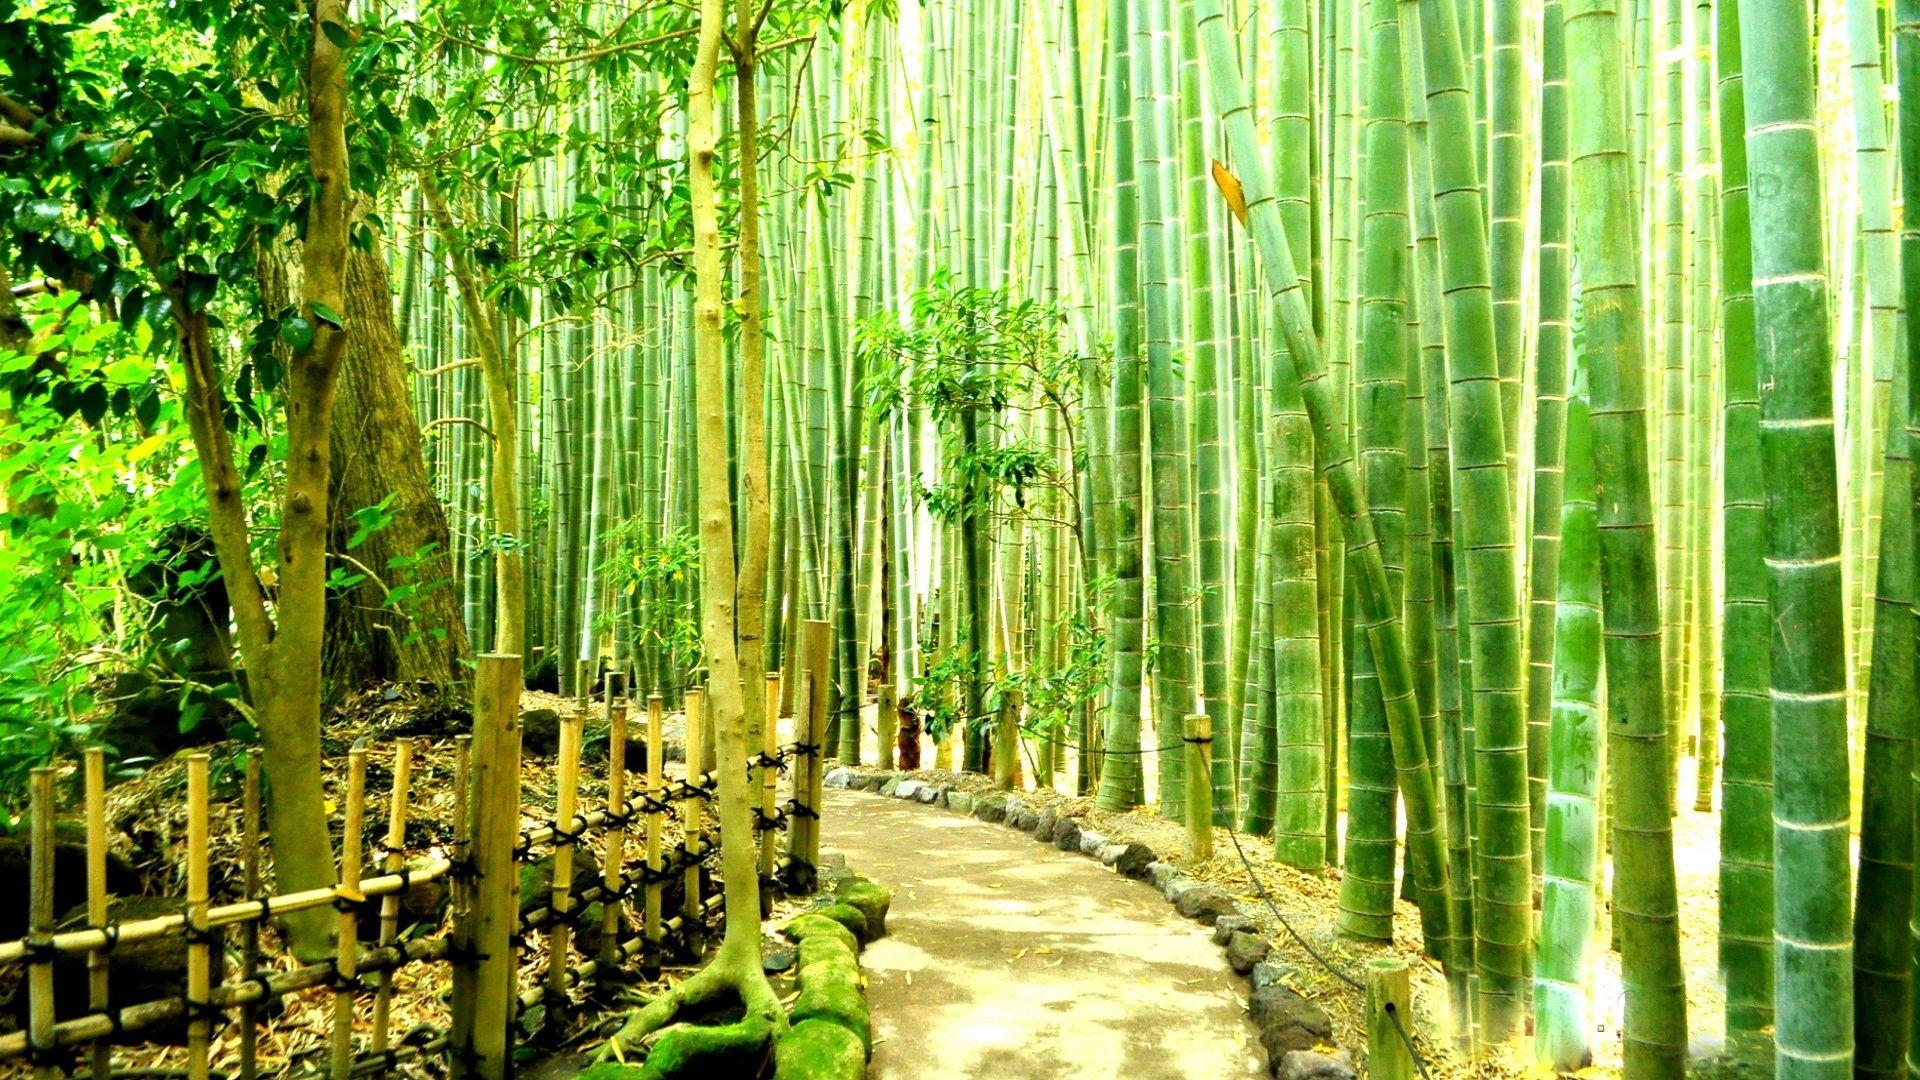 Wallpaper.wiki Bamboo Forest Wallpaper For Desktop PIC WPC0010139